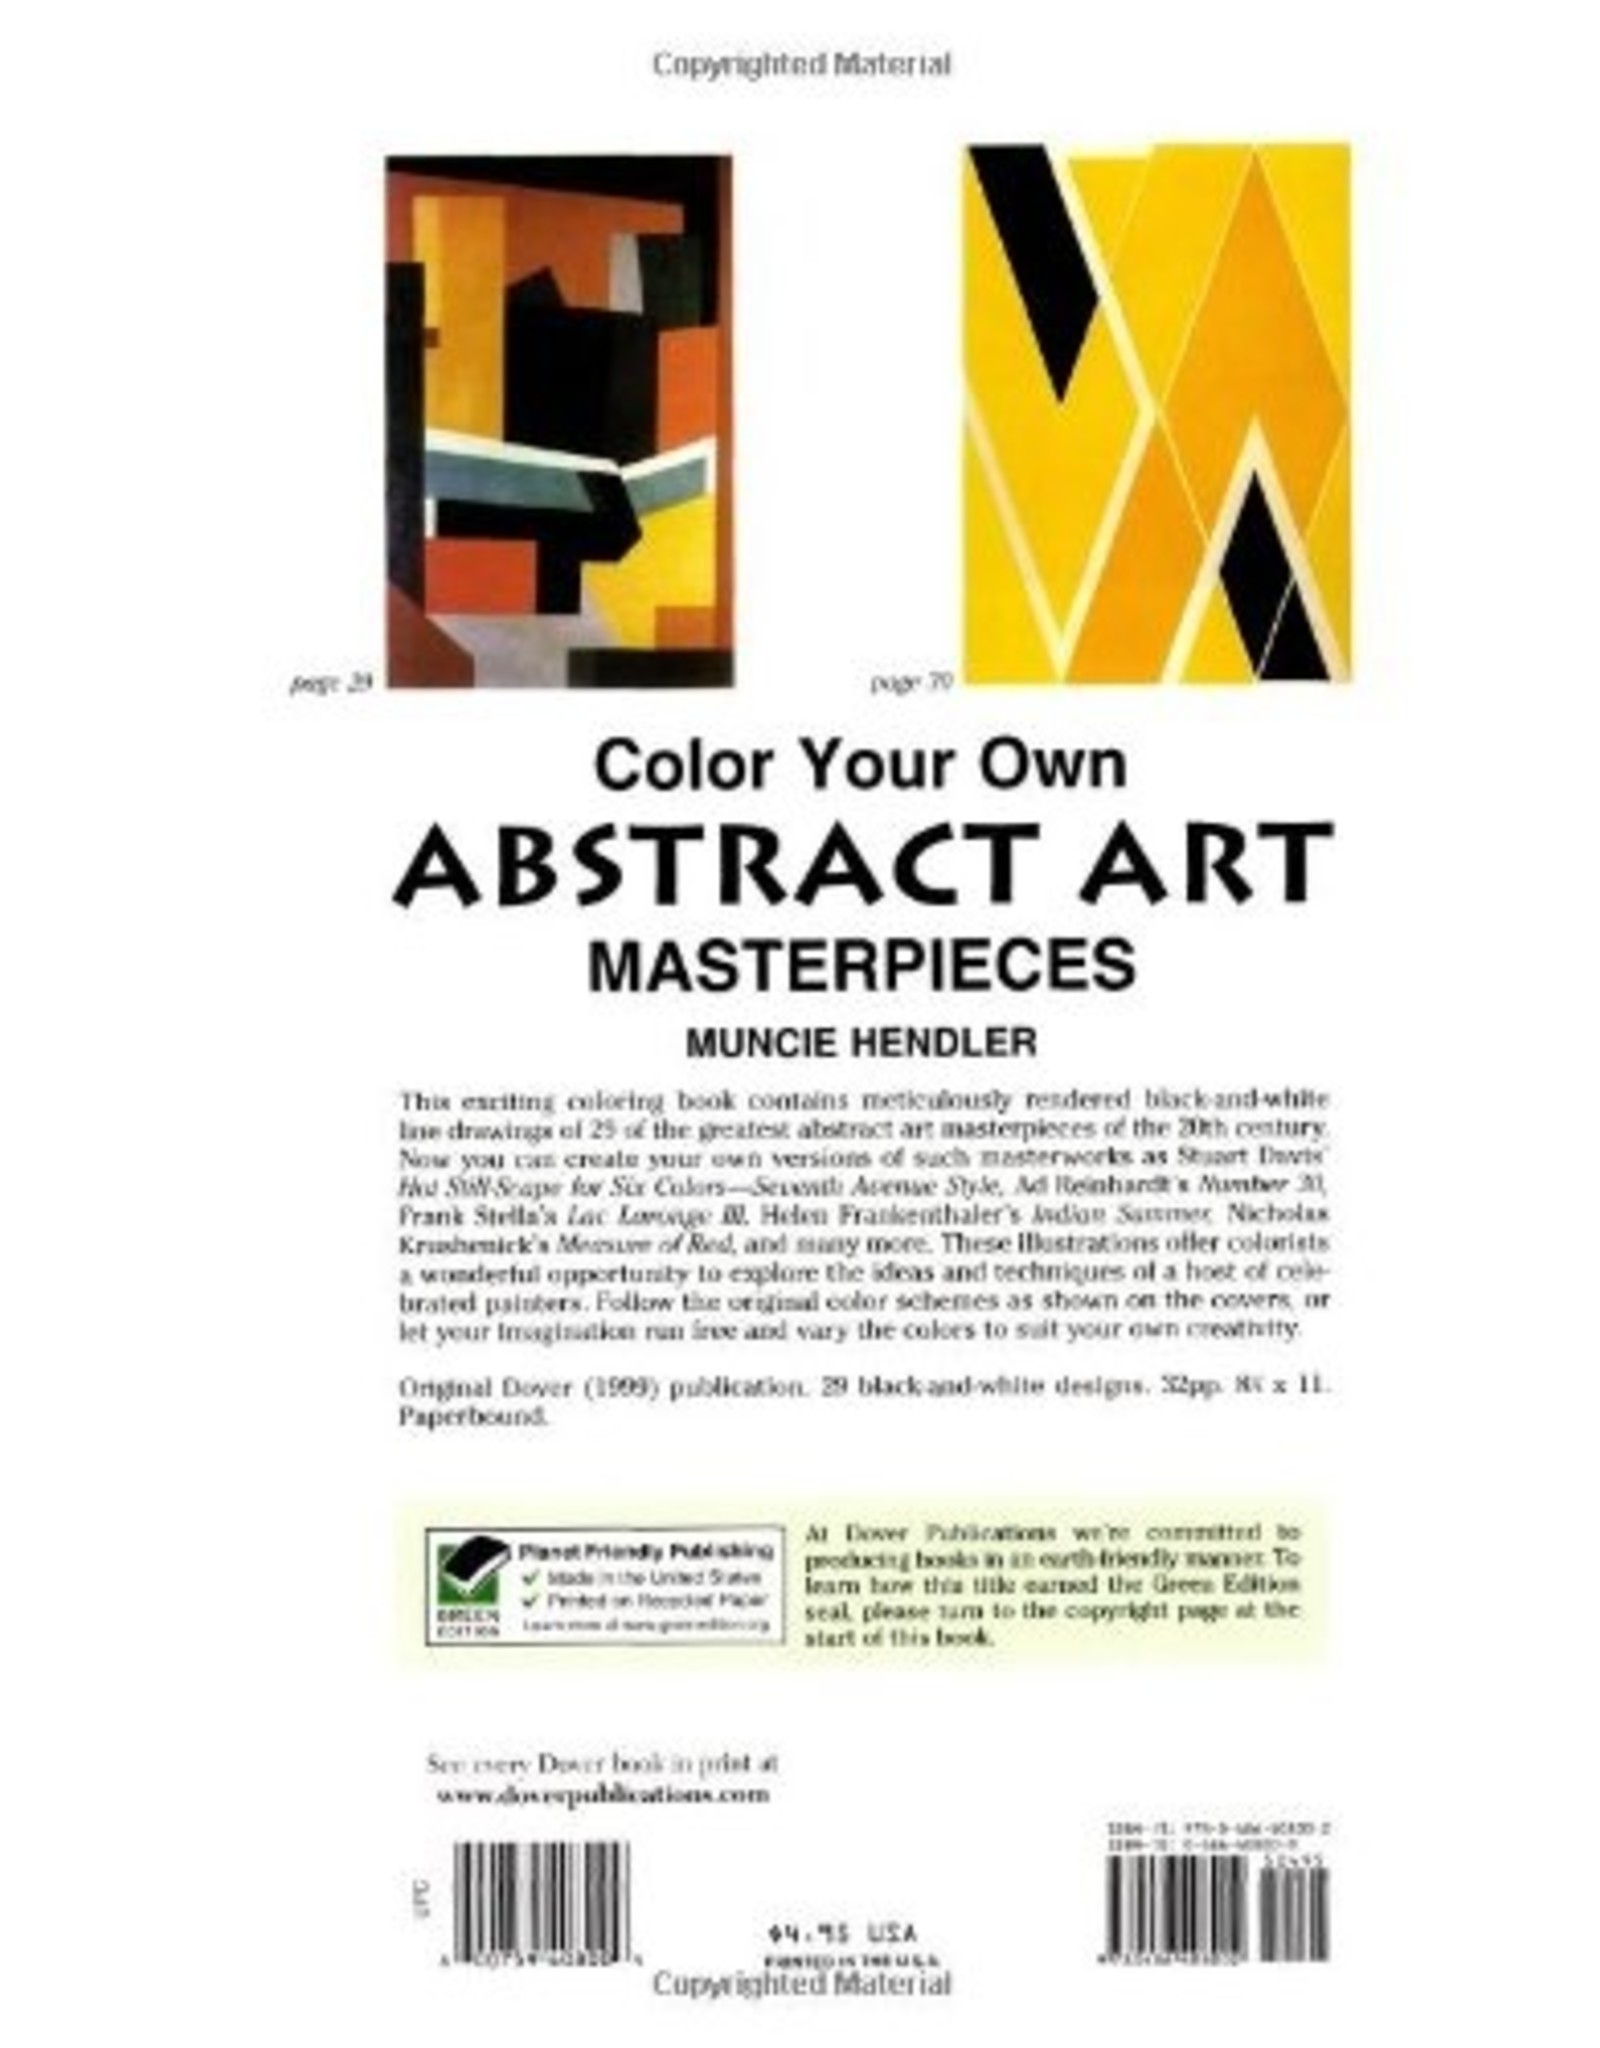 Color Your Own Abstract Art Masterpieces - Muncie Hendler